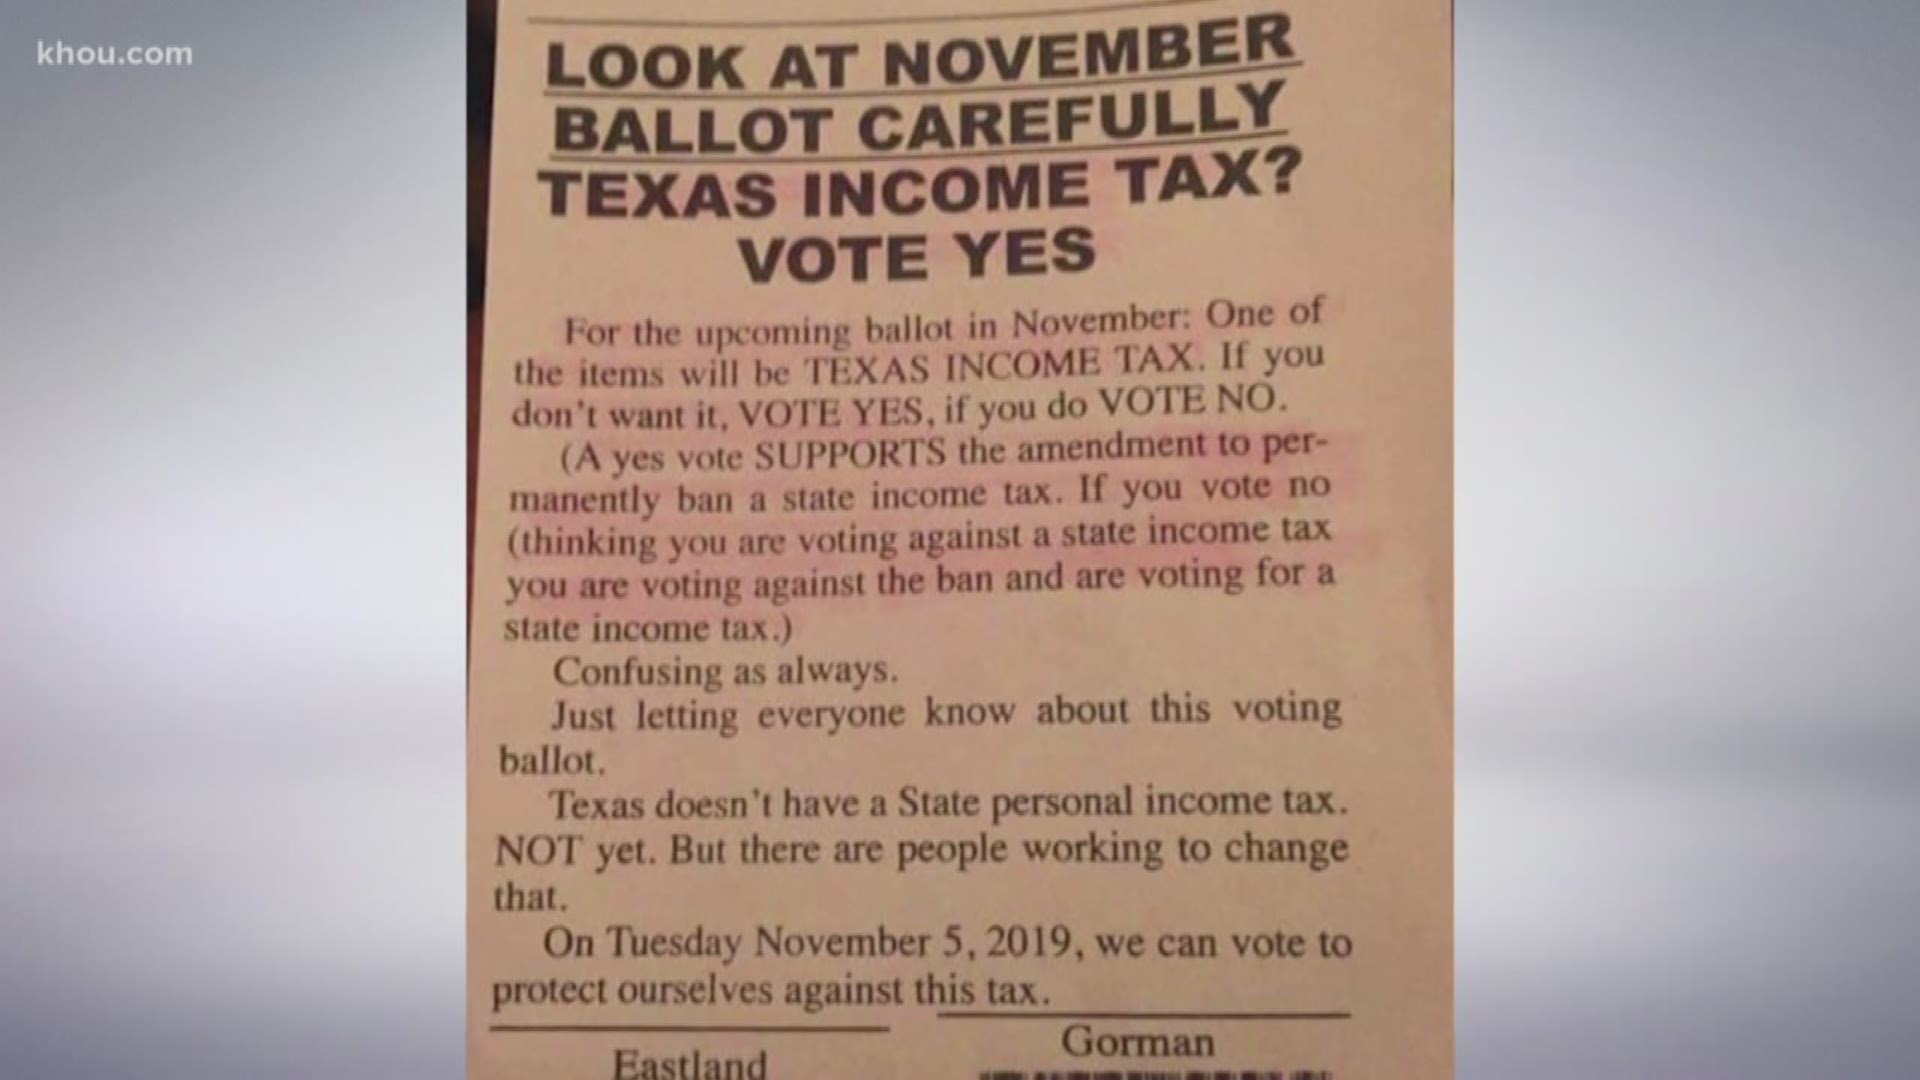 A viewer wanted to know if voters will get a chance to permanently ban a future state income tax in the upcoming election.